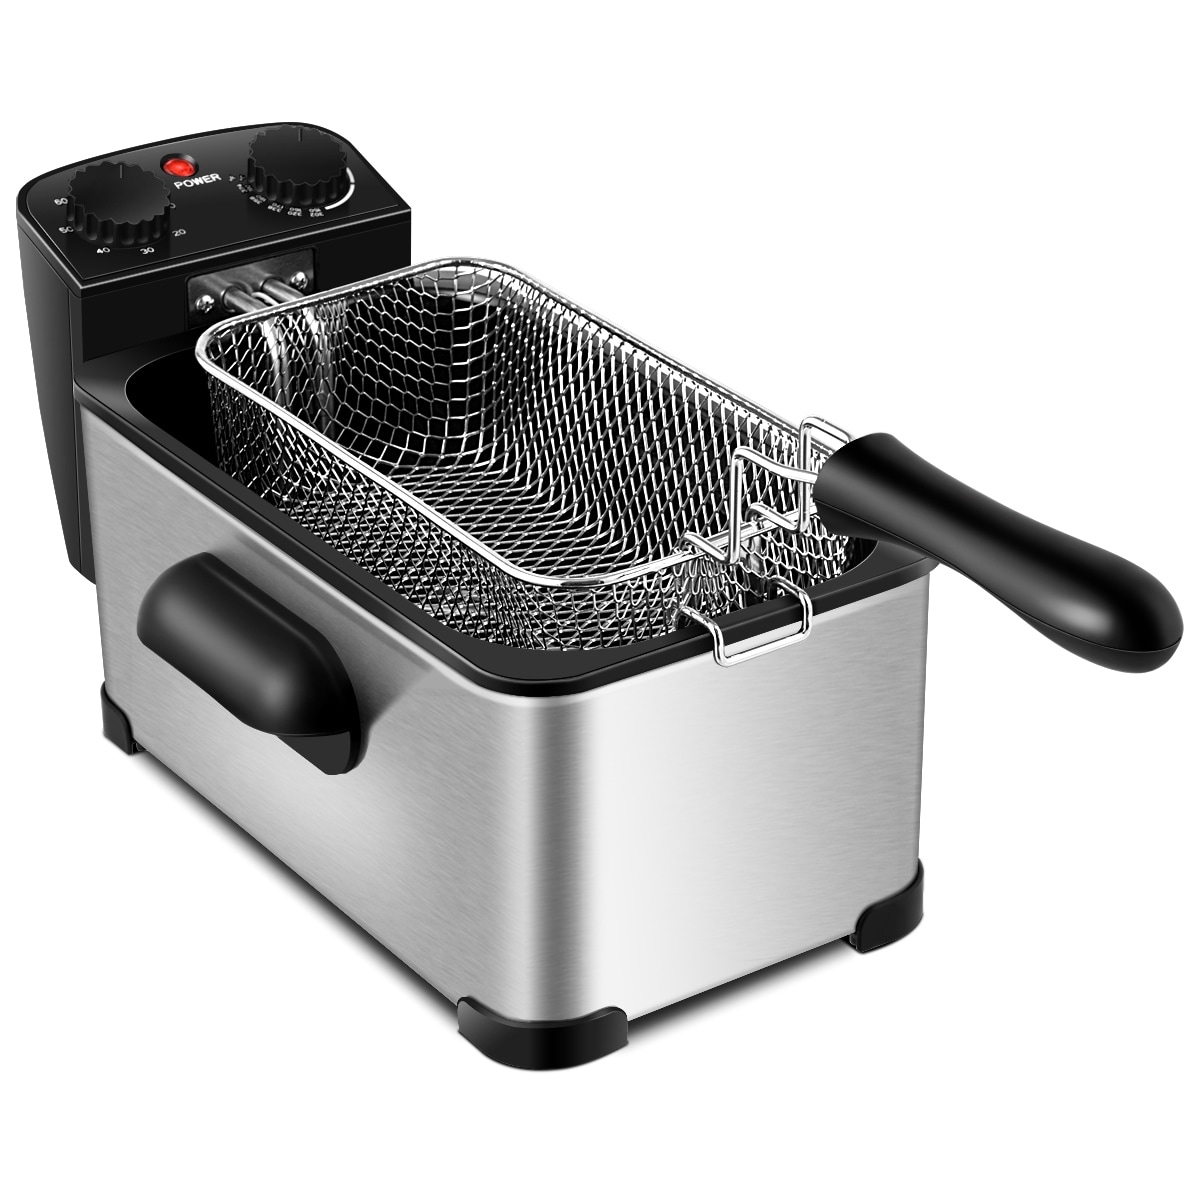 https://ak1.ostkcdn.com/images/products/is/images/direct/c5b5a276d1da297fd0ec56379be60297a820b9c6/Costway-3.2-Quart-Electric-Deep-Fryer-1700W-Stainless-Steel-Timer.jpg